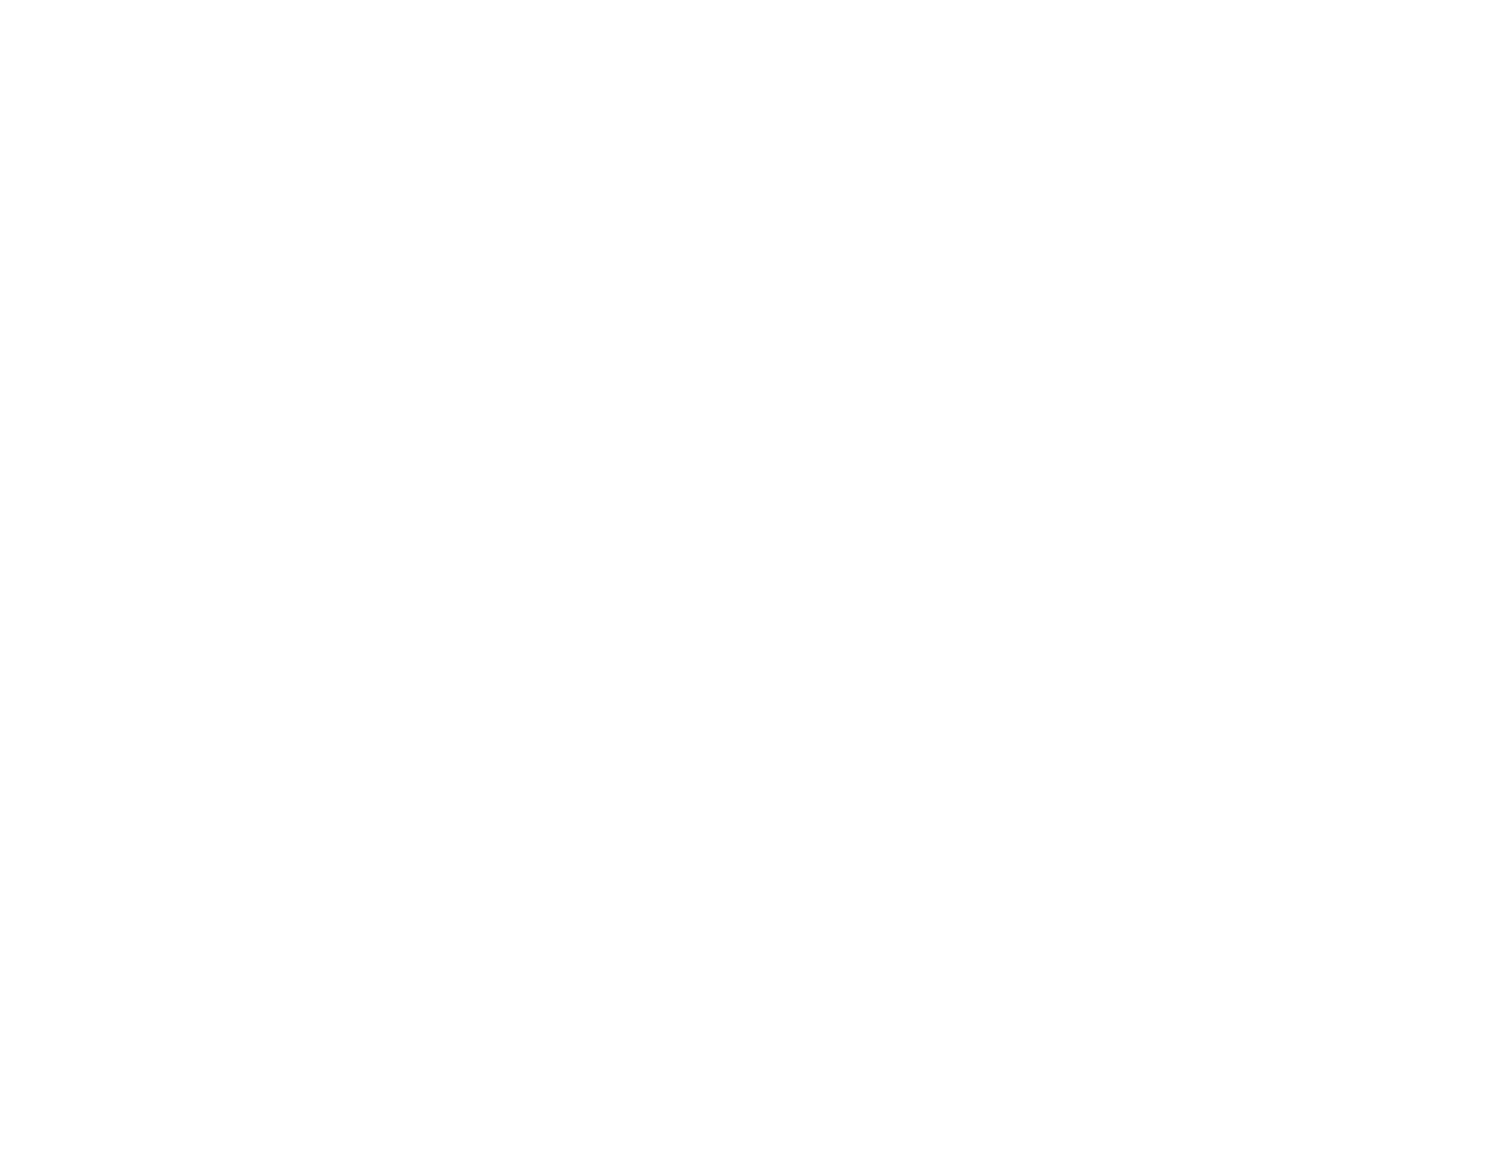 DD AirBags - AirBags for All Action Sports